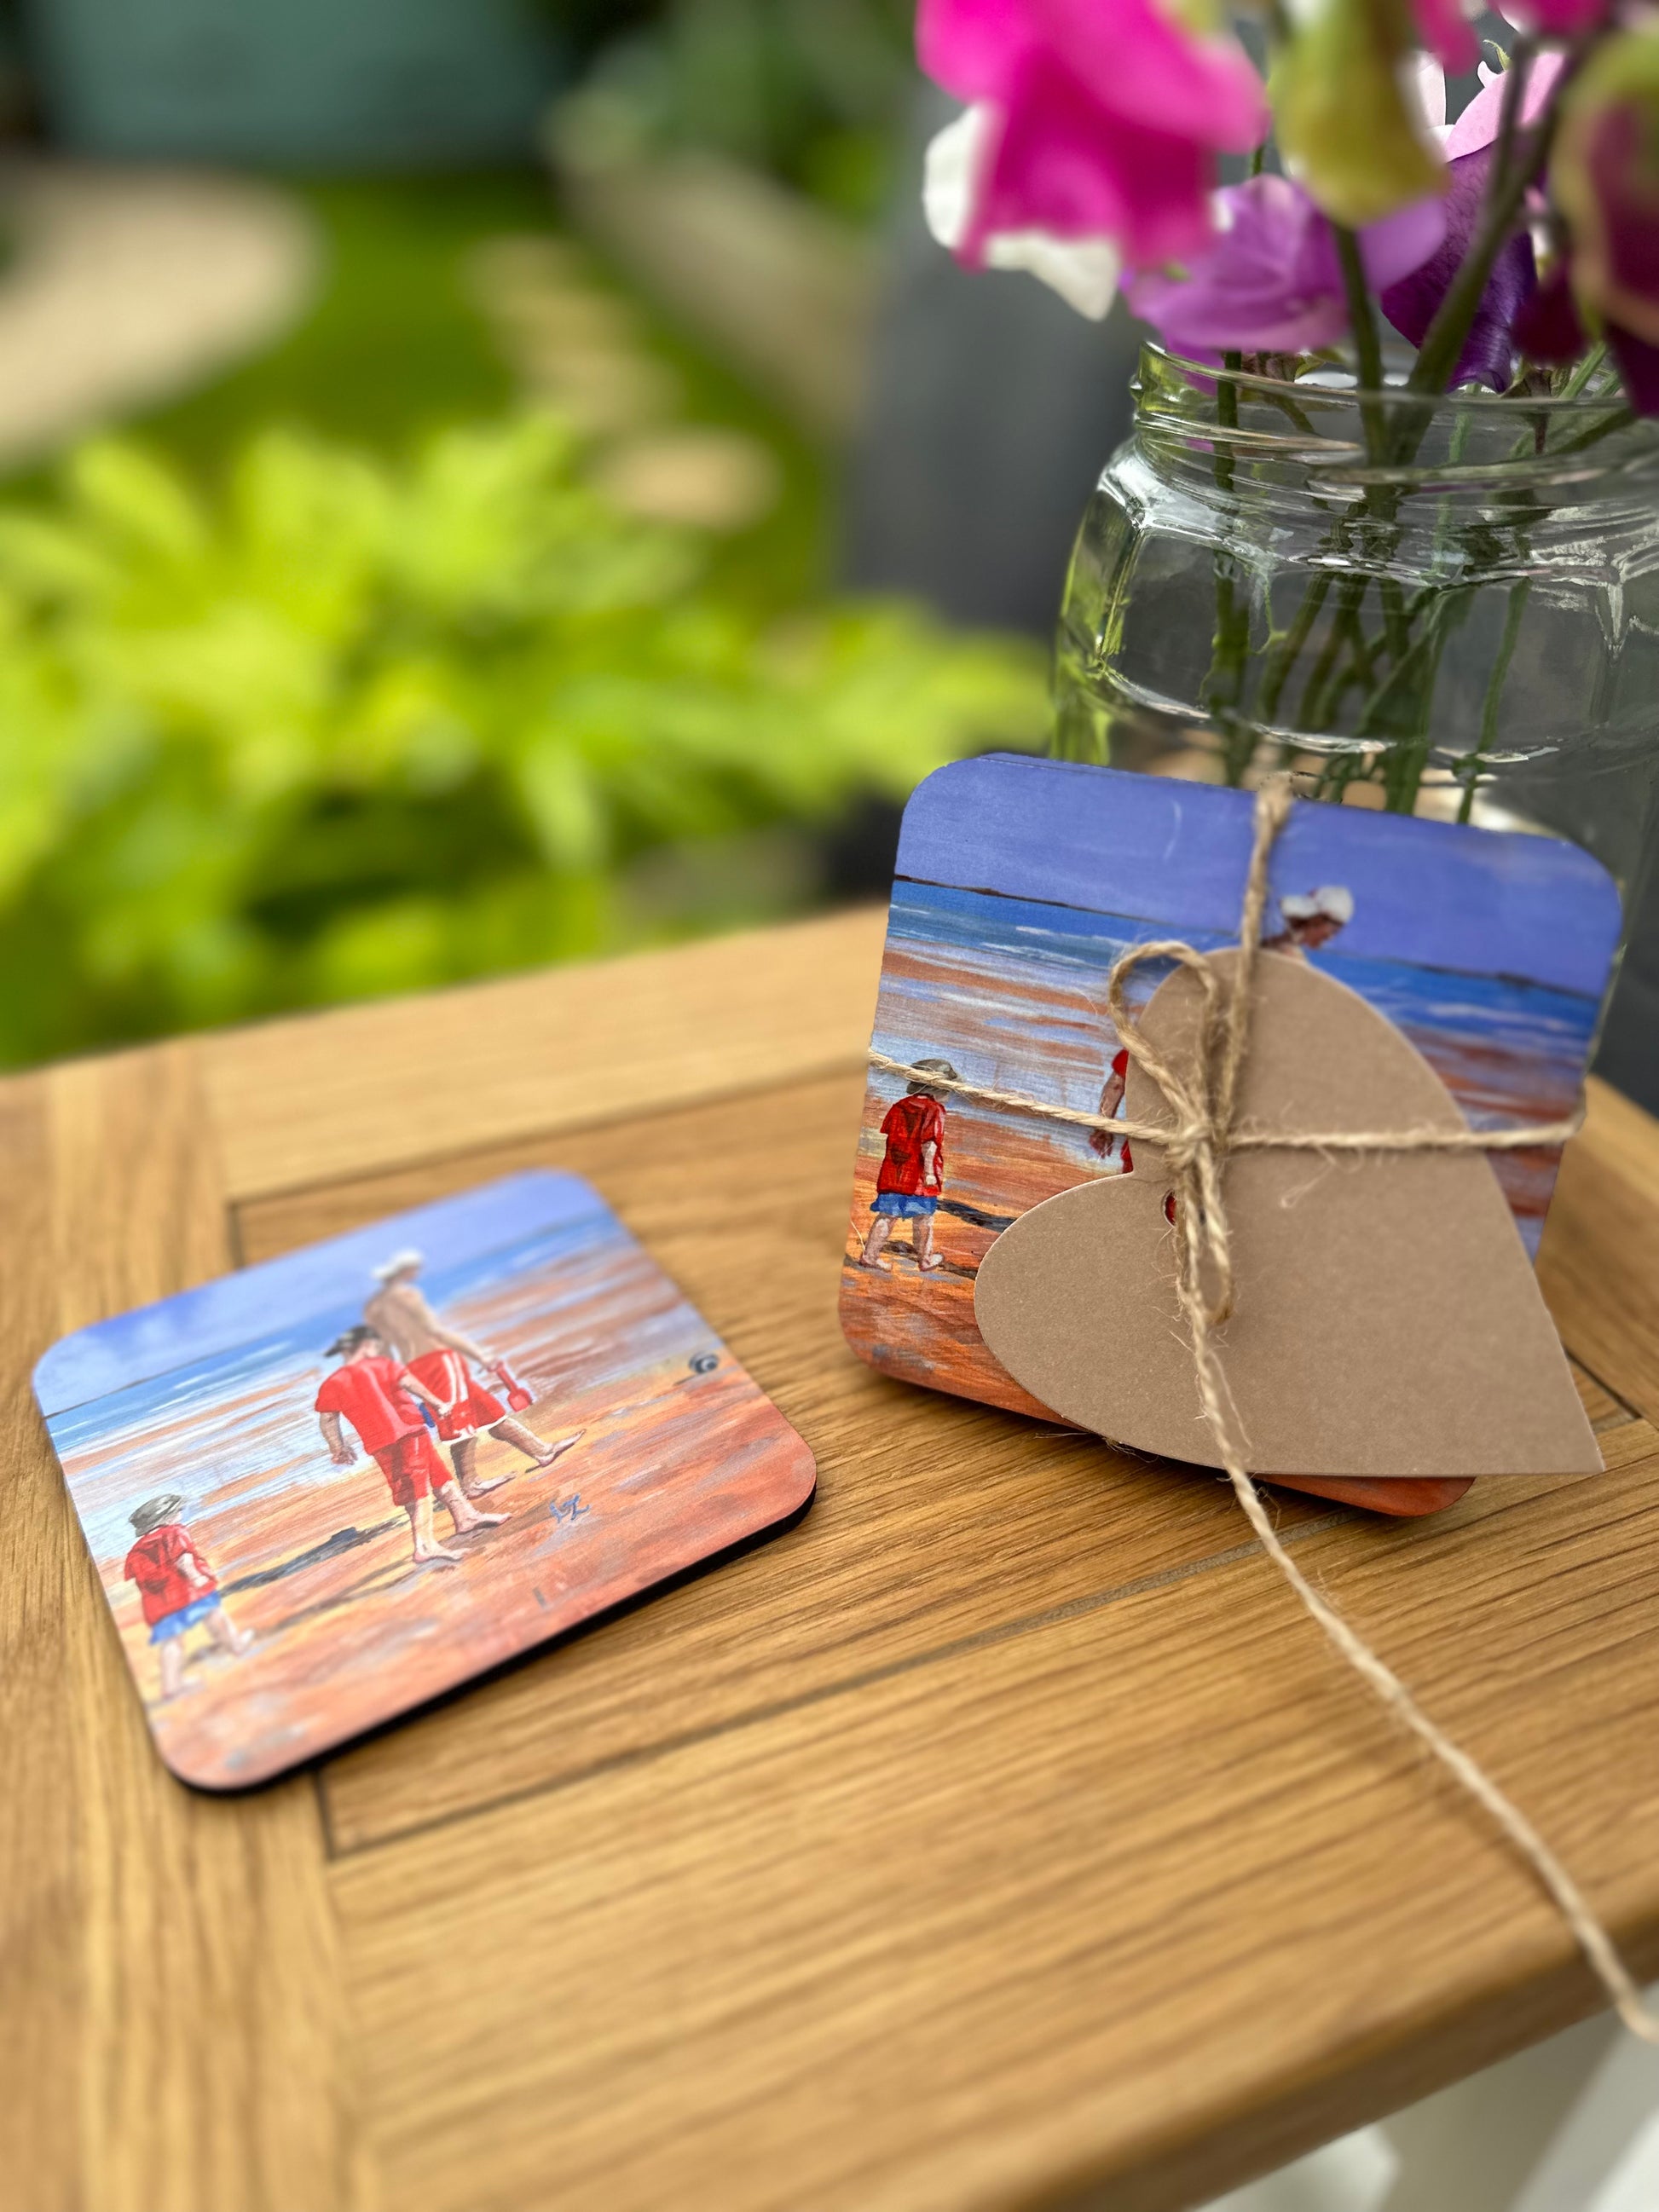 Coaster Set The Brothers St Andrews Beach, coaster set tied in bundle with single coaster displayed